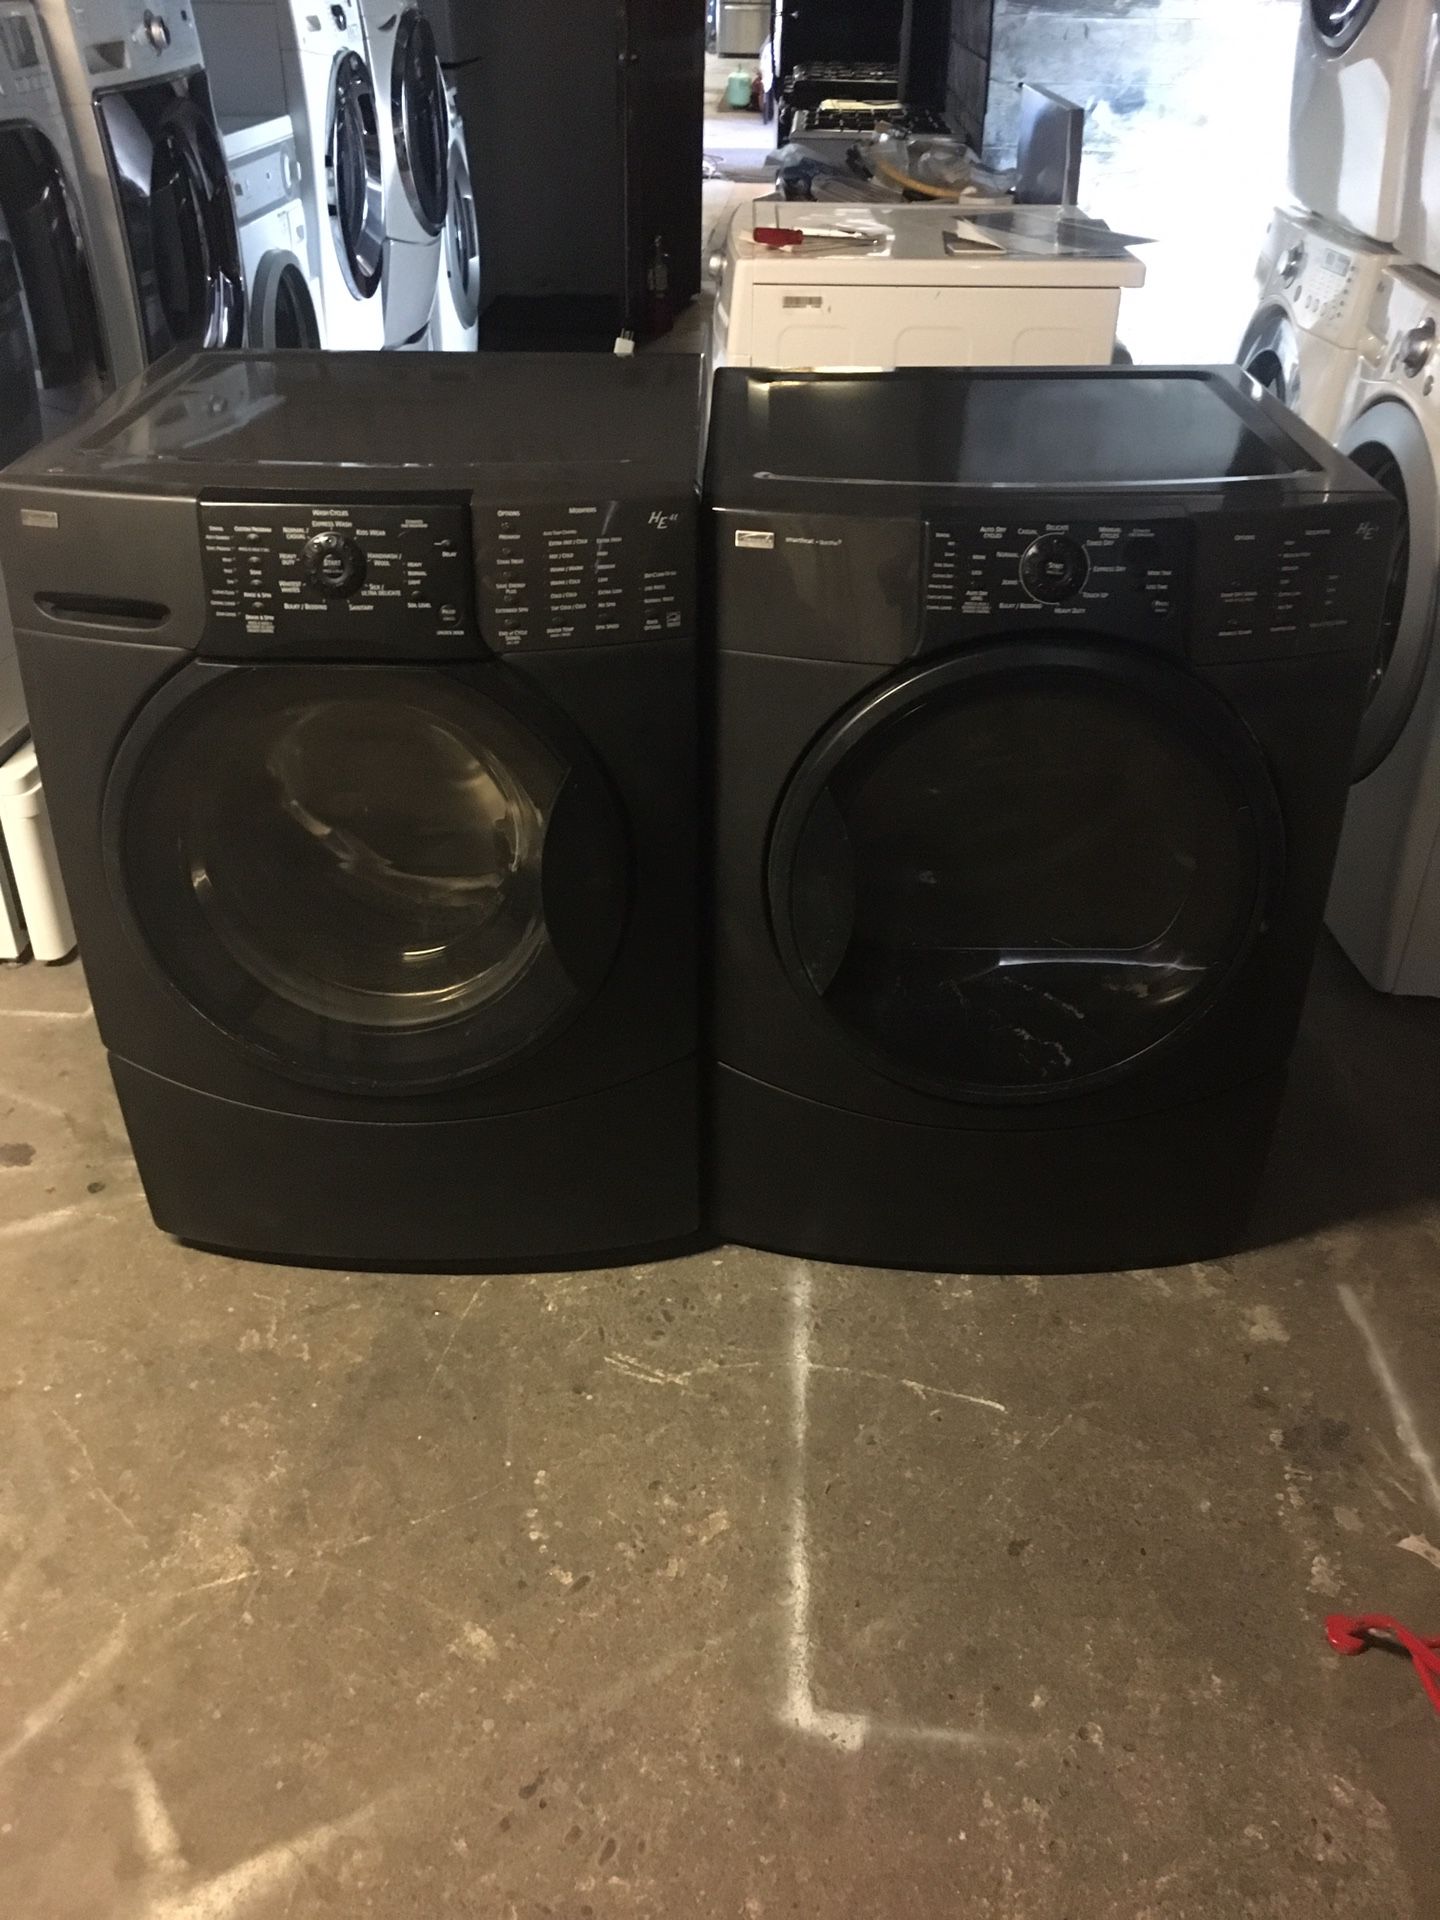 Set washer and dryer brand kenmore gas dryer everything is good working condition 90 days warranty delivery and installation